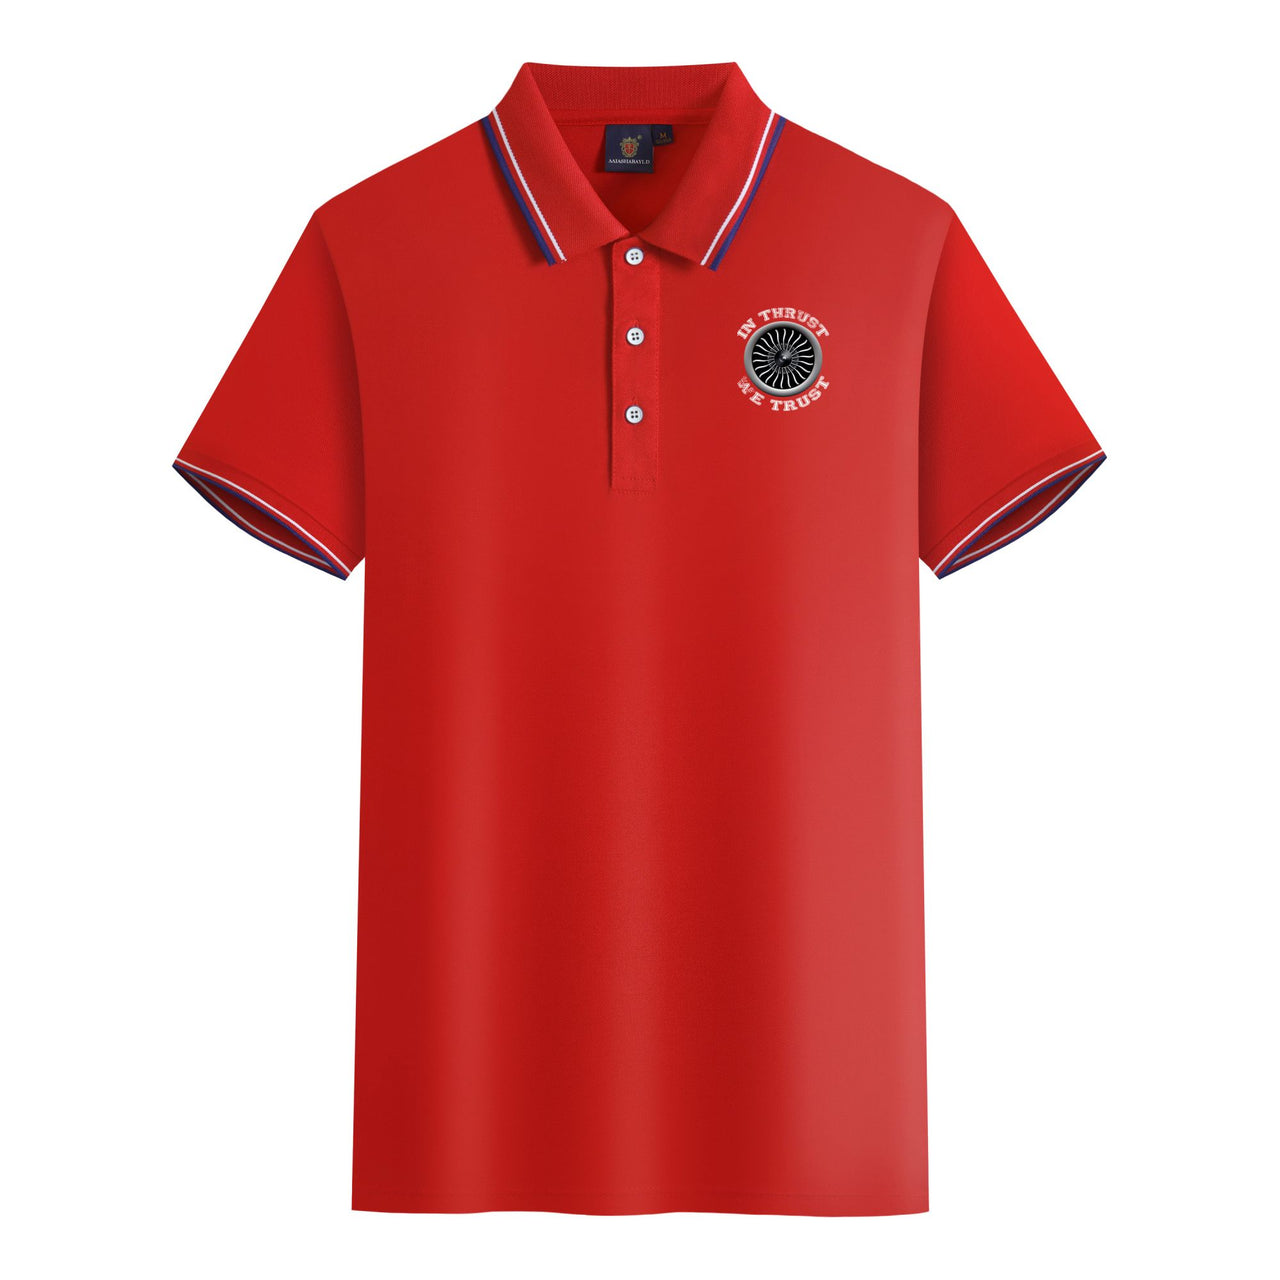 In Thrust We Trust (Vol 2) Designed Stylish Polo T-Shirts